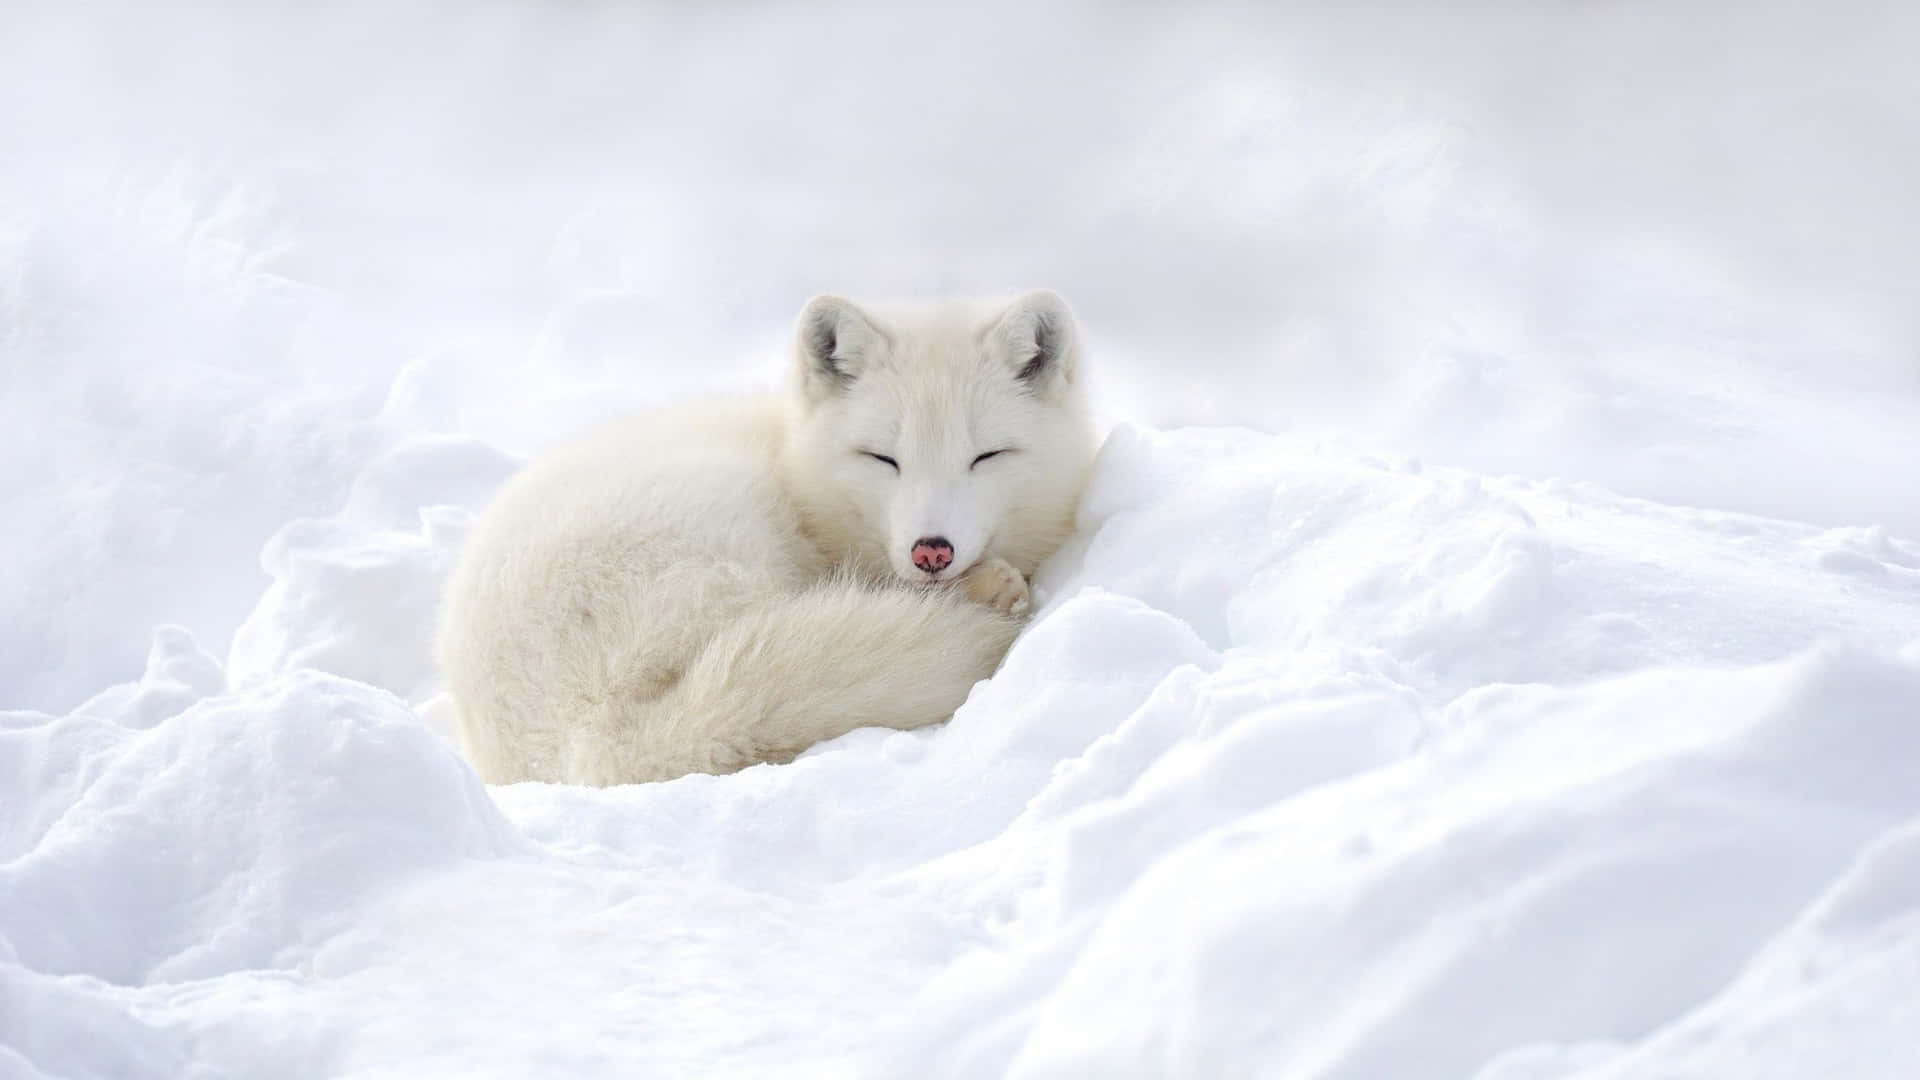 A beautiful arctic fox gazing out into the snow-filled landscape